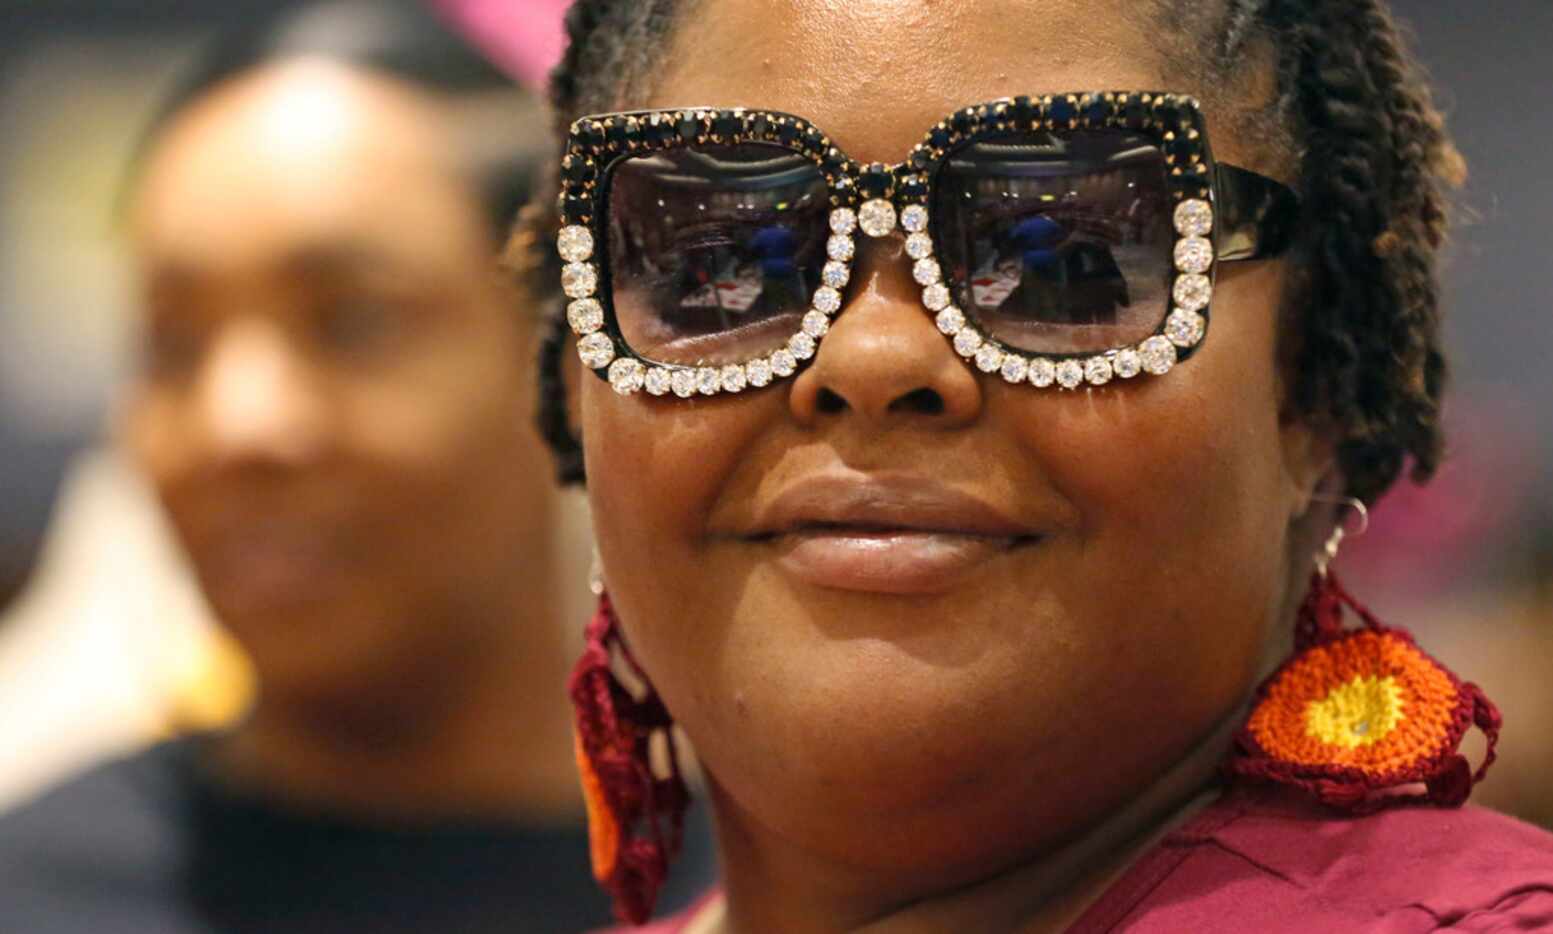 Katrina Whitfield tries on some stylish sunglasses during the Afrolicious Hair and Beauty...